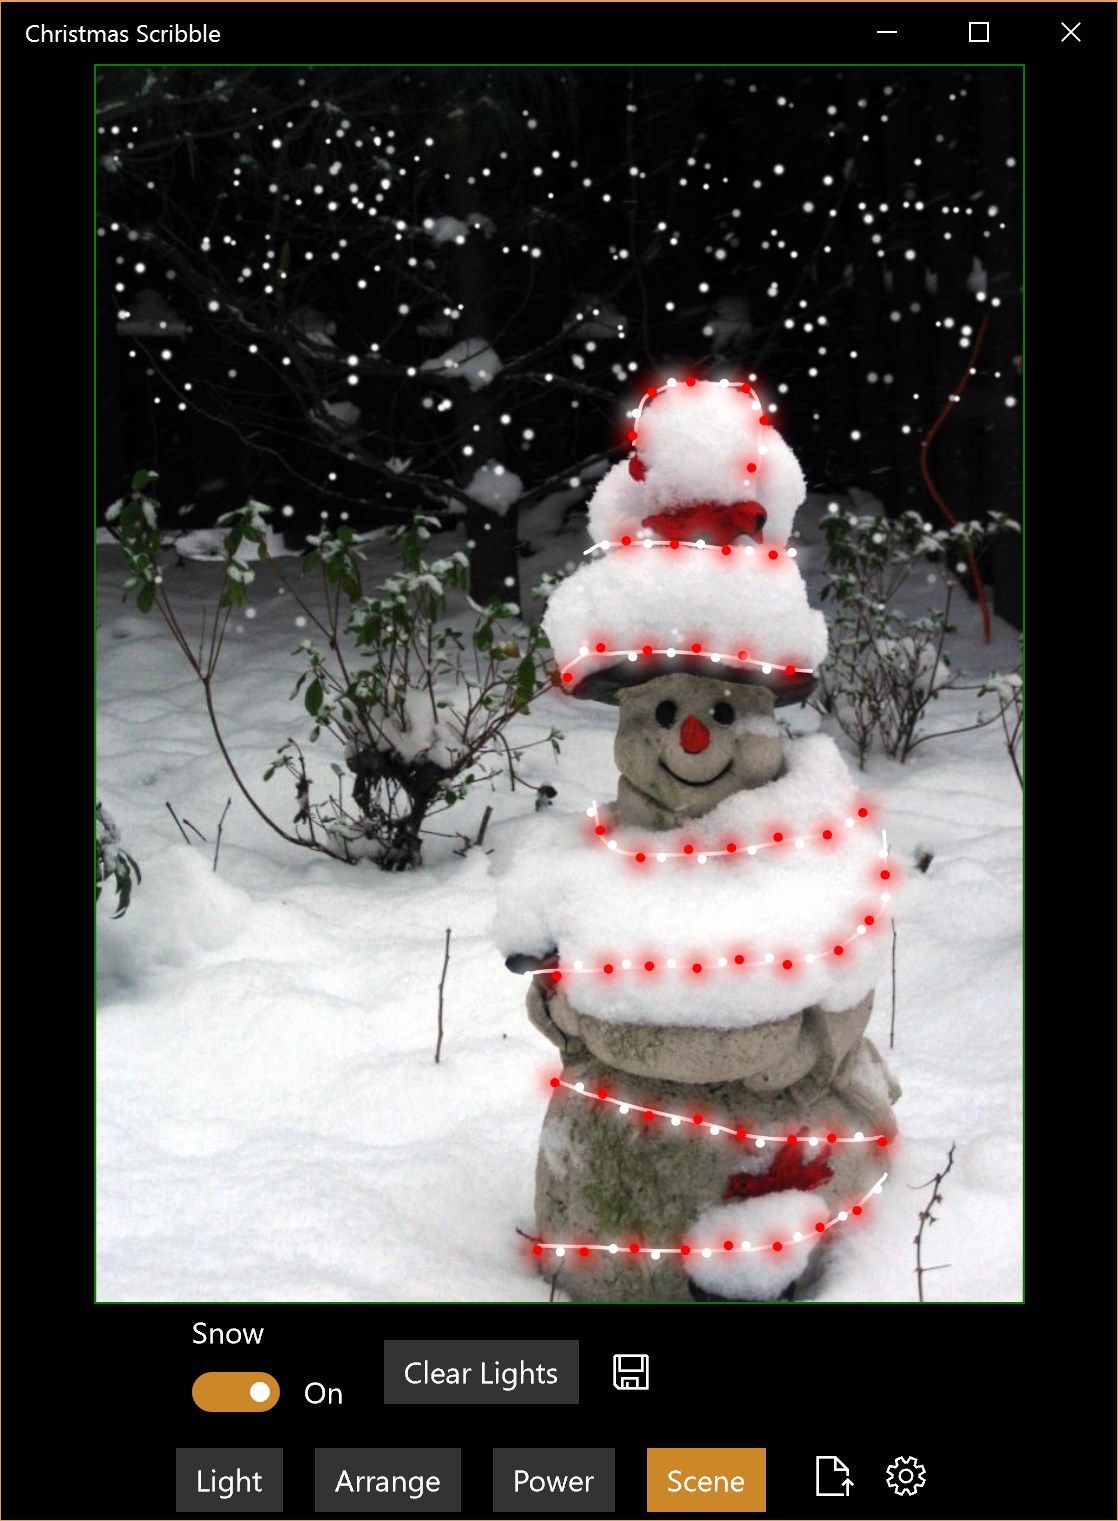 A lonely snowman warmed by some peppermint-colored lights and cozy snow.